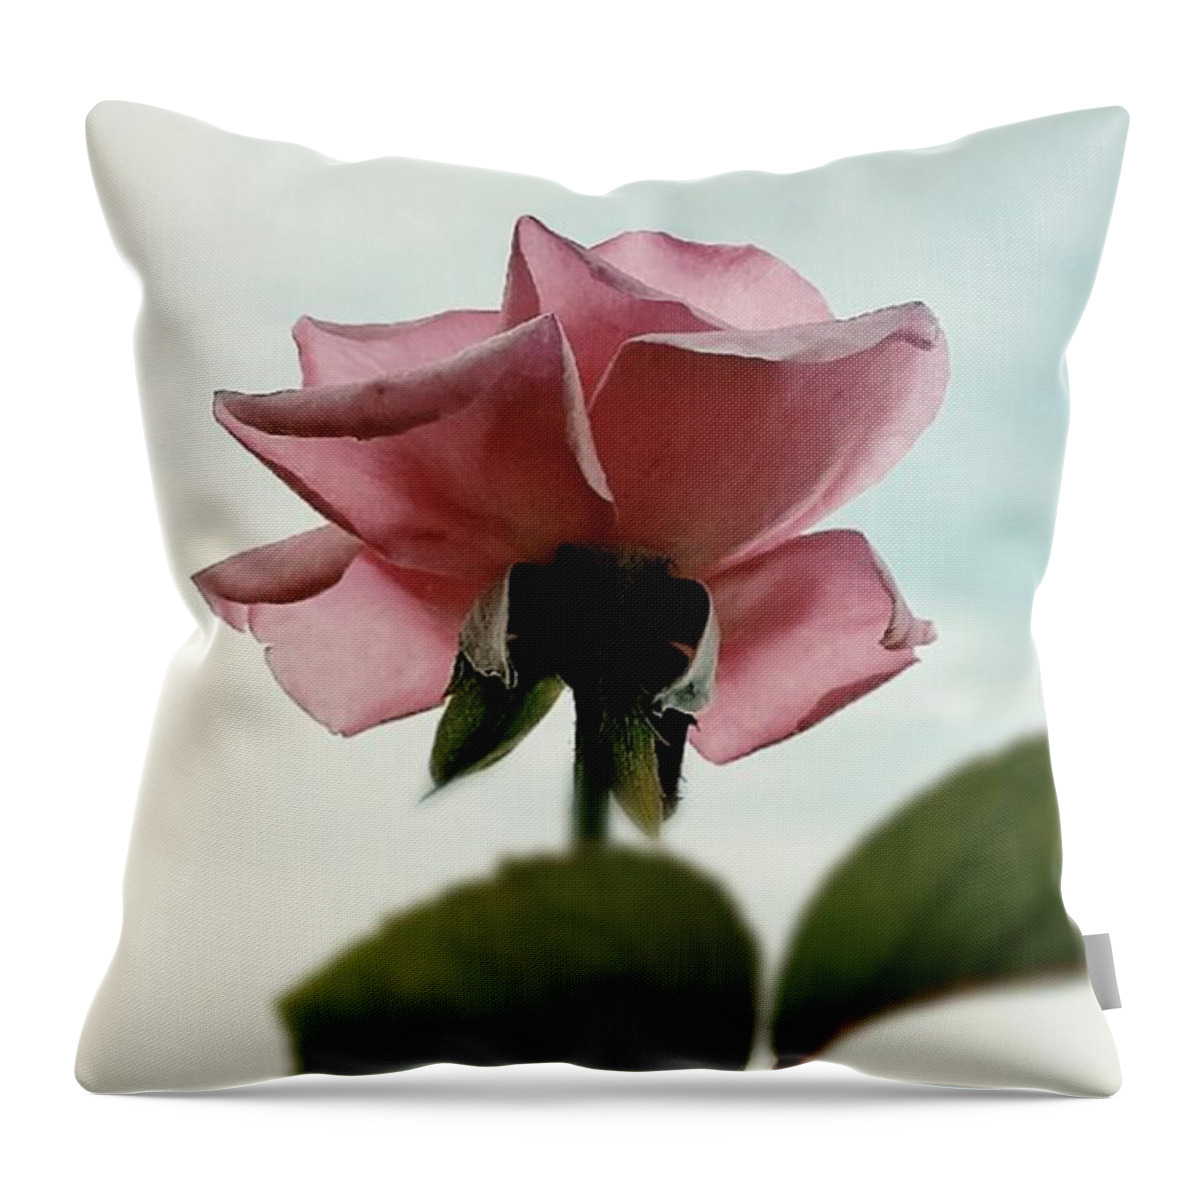 Rose Throw Pillow featuring the photograph A New Rose Perspective by Alexis King-Glandon